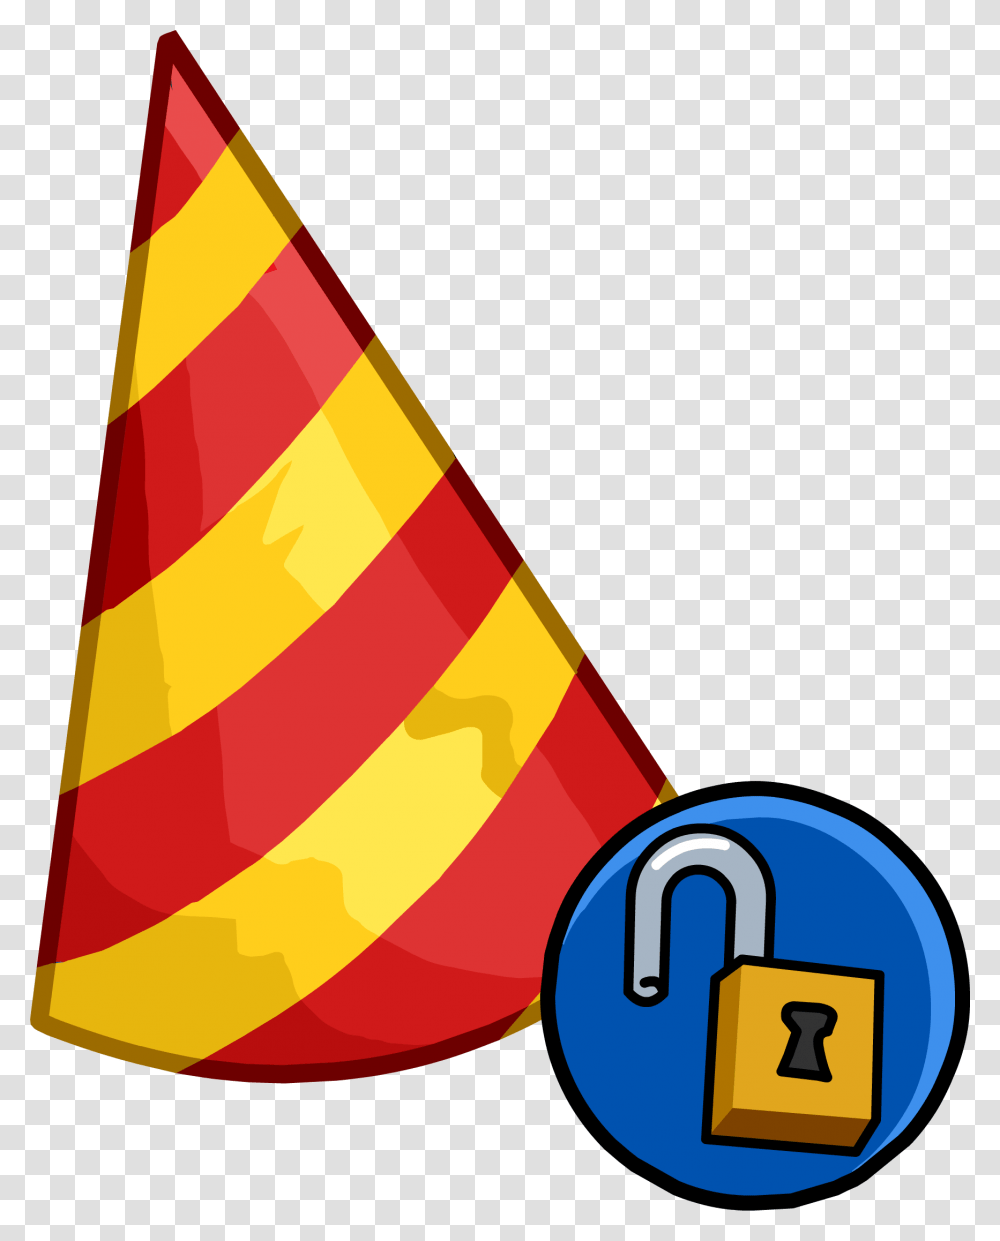 Club Penguin 11th Anniversary Hat Club Penguin 11th Anniversary Hat Transparent Png